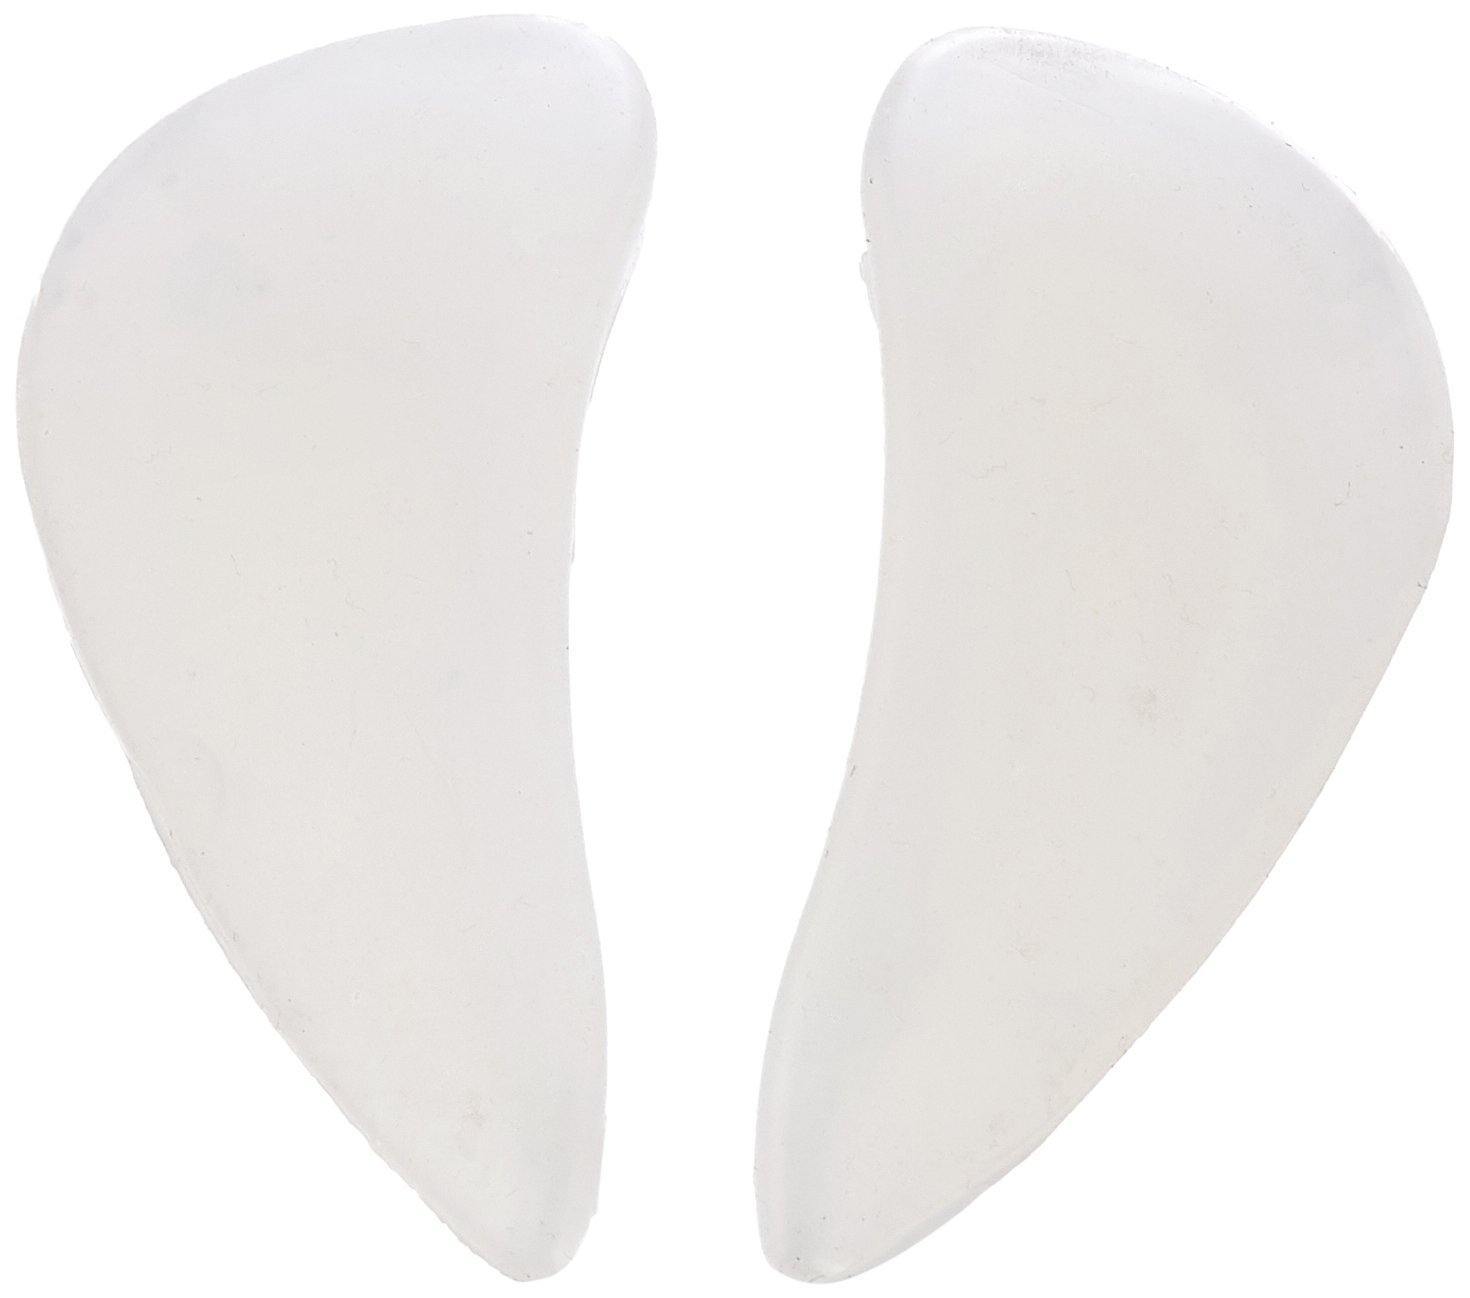 Tynor Arch Support Semi Pro pair K-15-Health & Personal Care-dealsplant